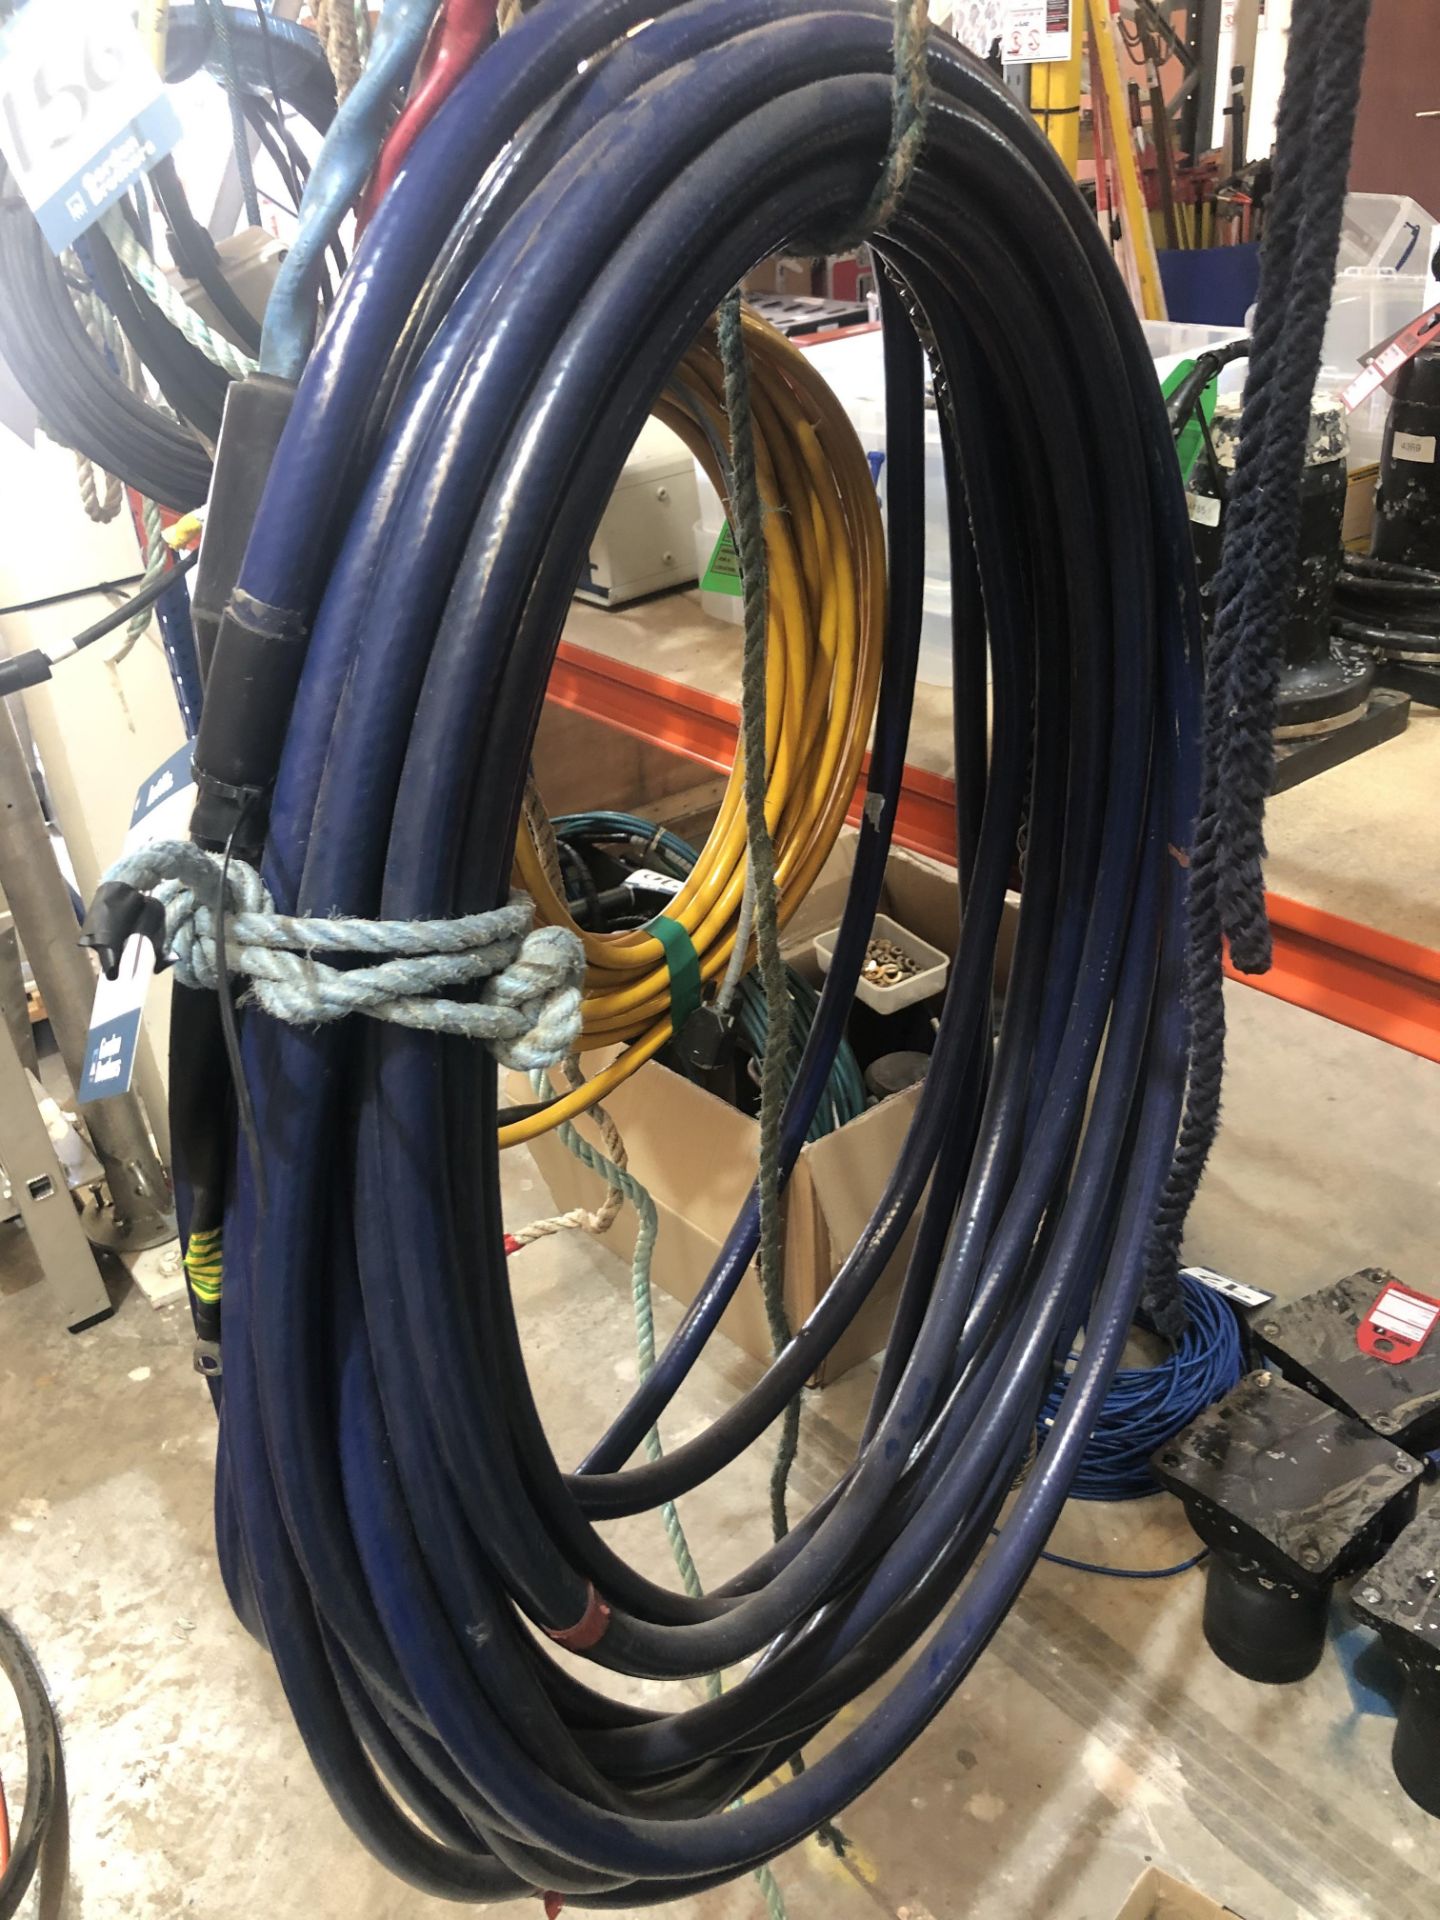 High voltage boomer cable, approx. 15m